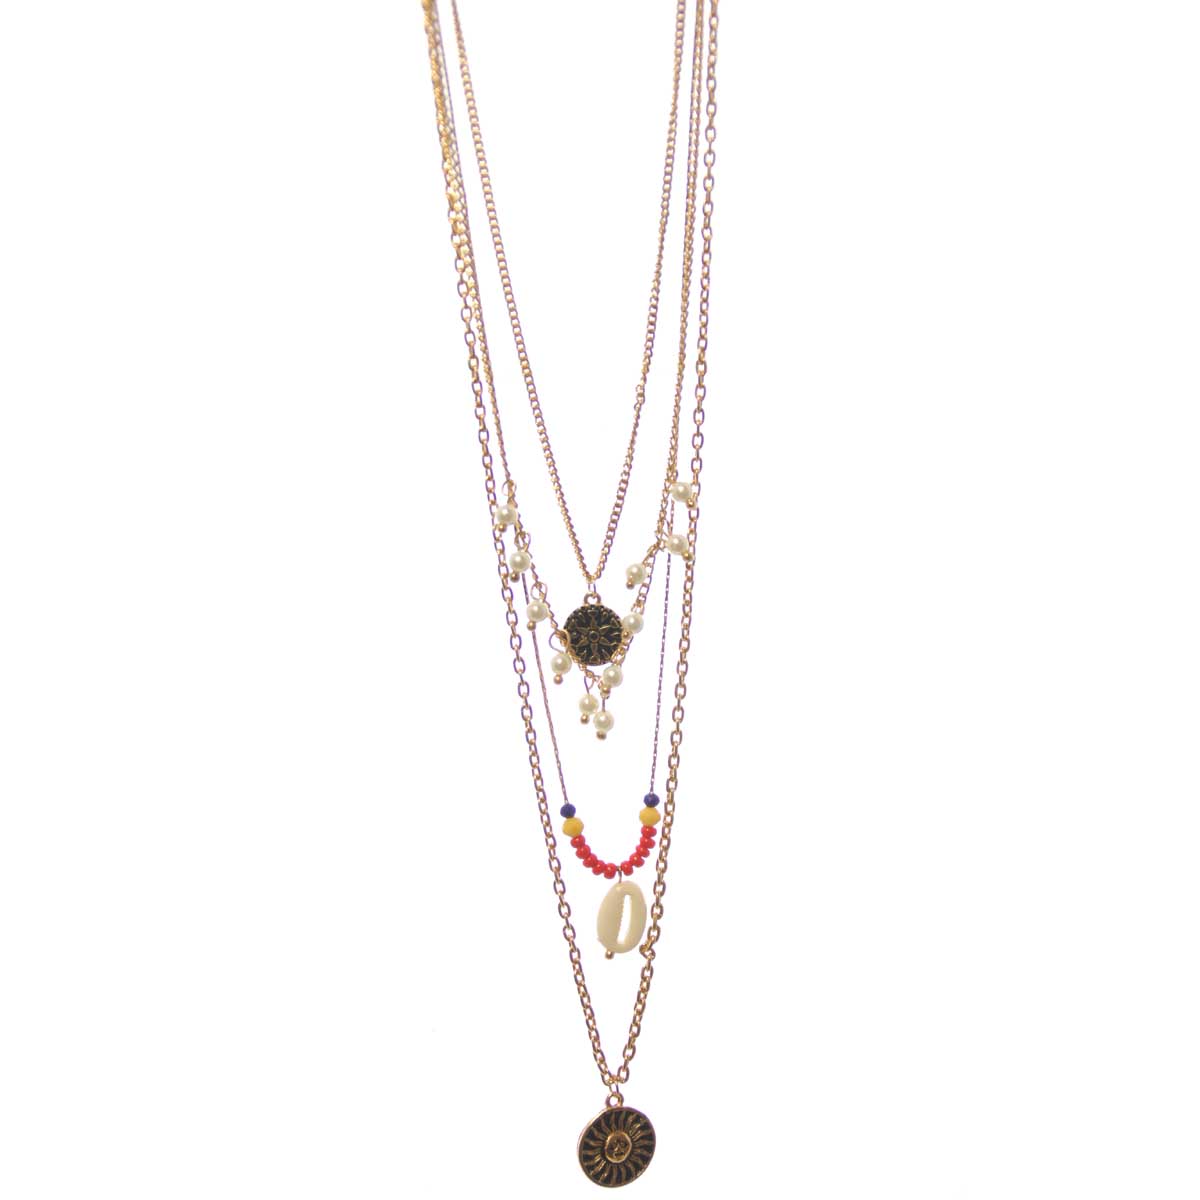 Charlie Paige Droplets of Tranquility Necklace